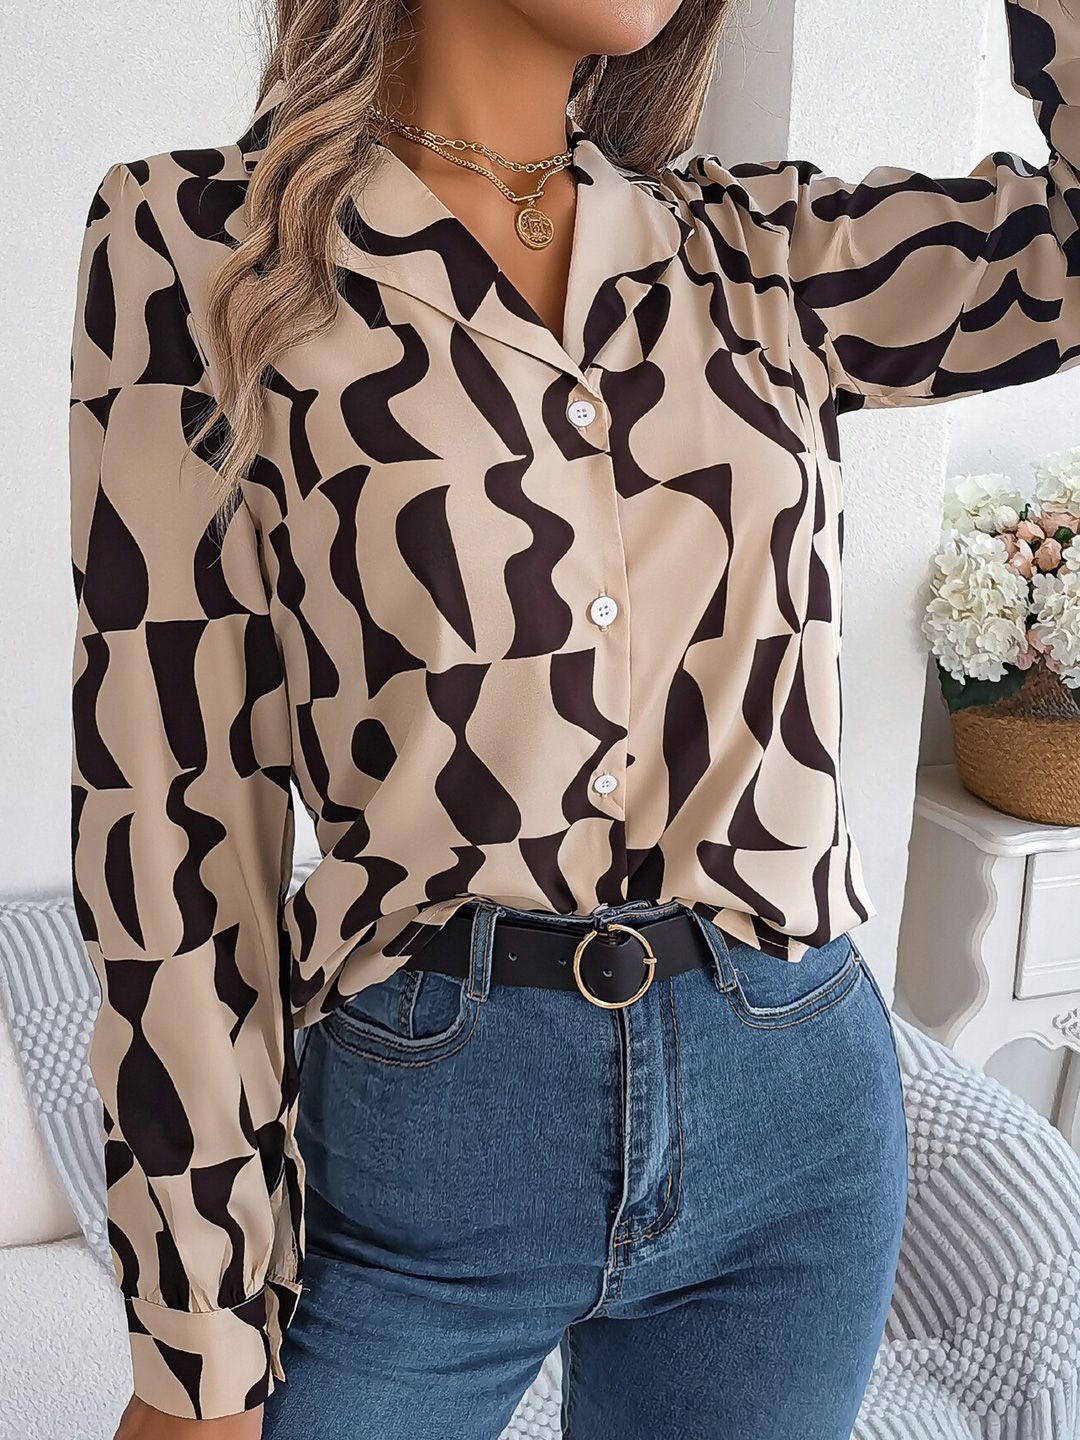 StyleCast Beige Abstract Printed Casual Shirt